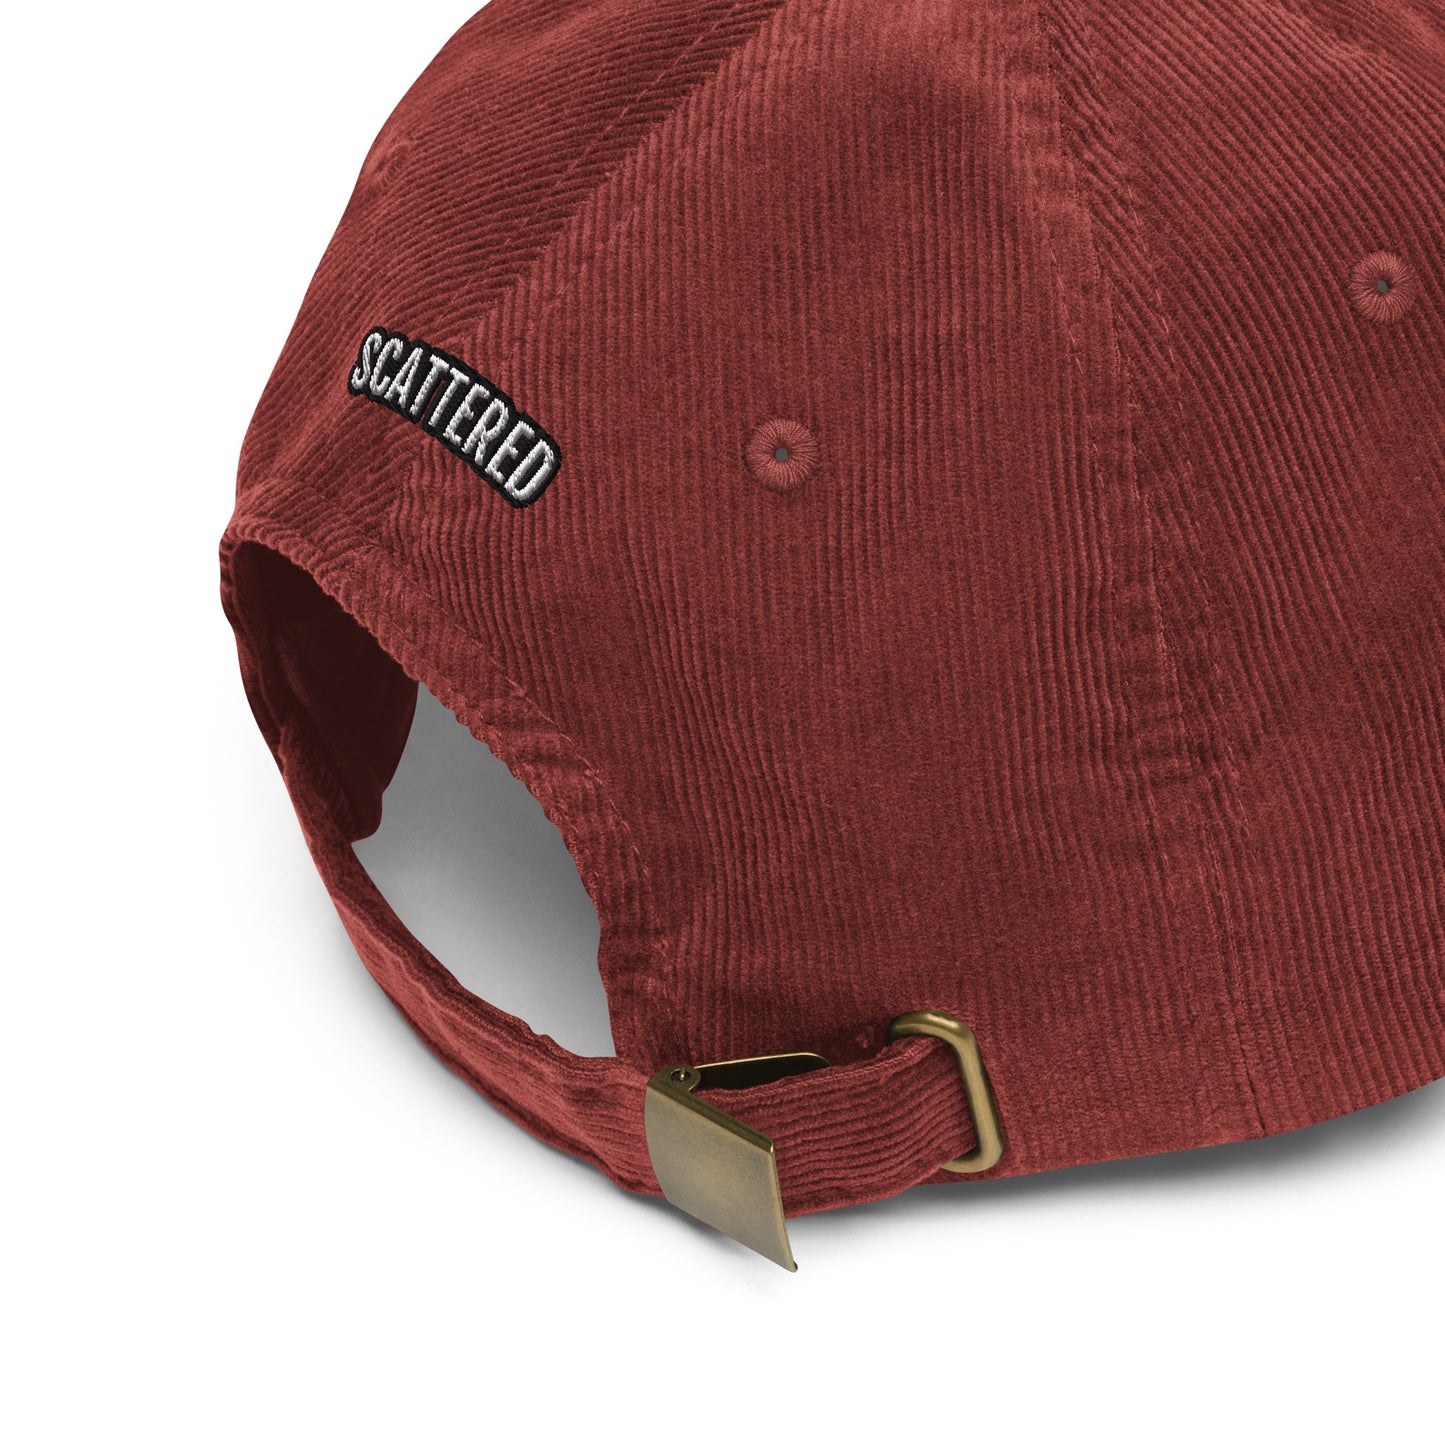 New York Apple Logo Embroidered Red Vintage Corduroy Hat Scattered Streetwear